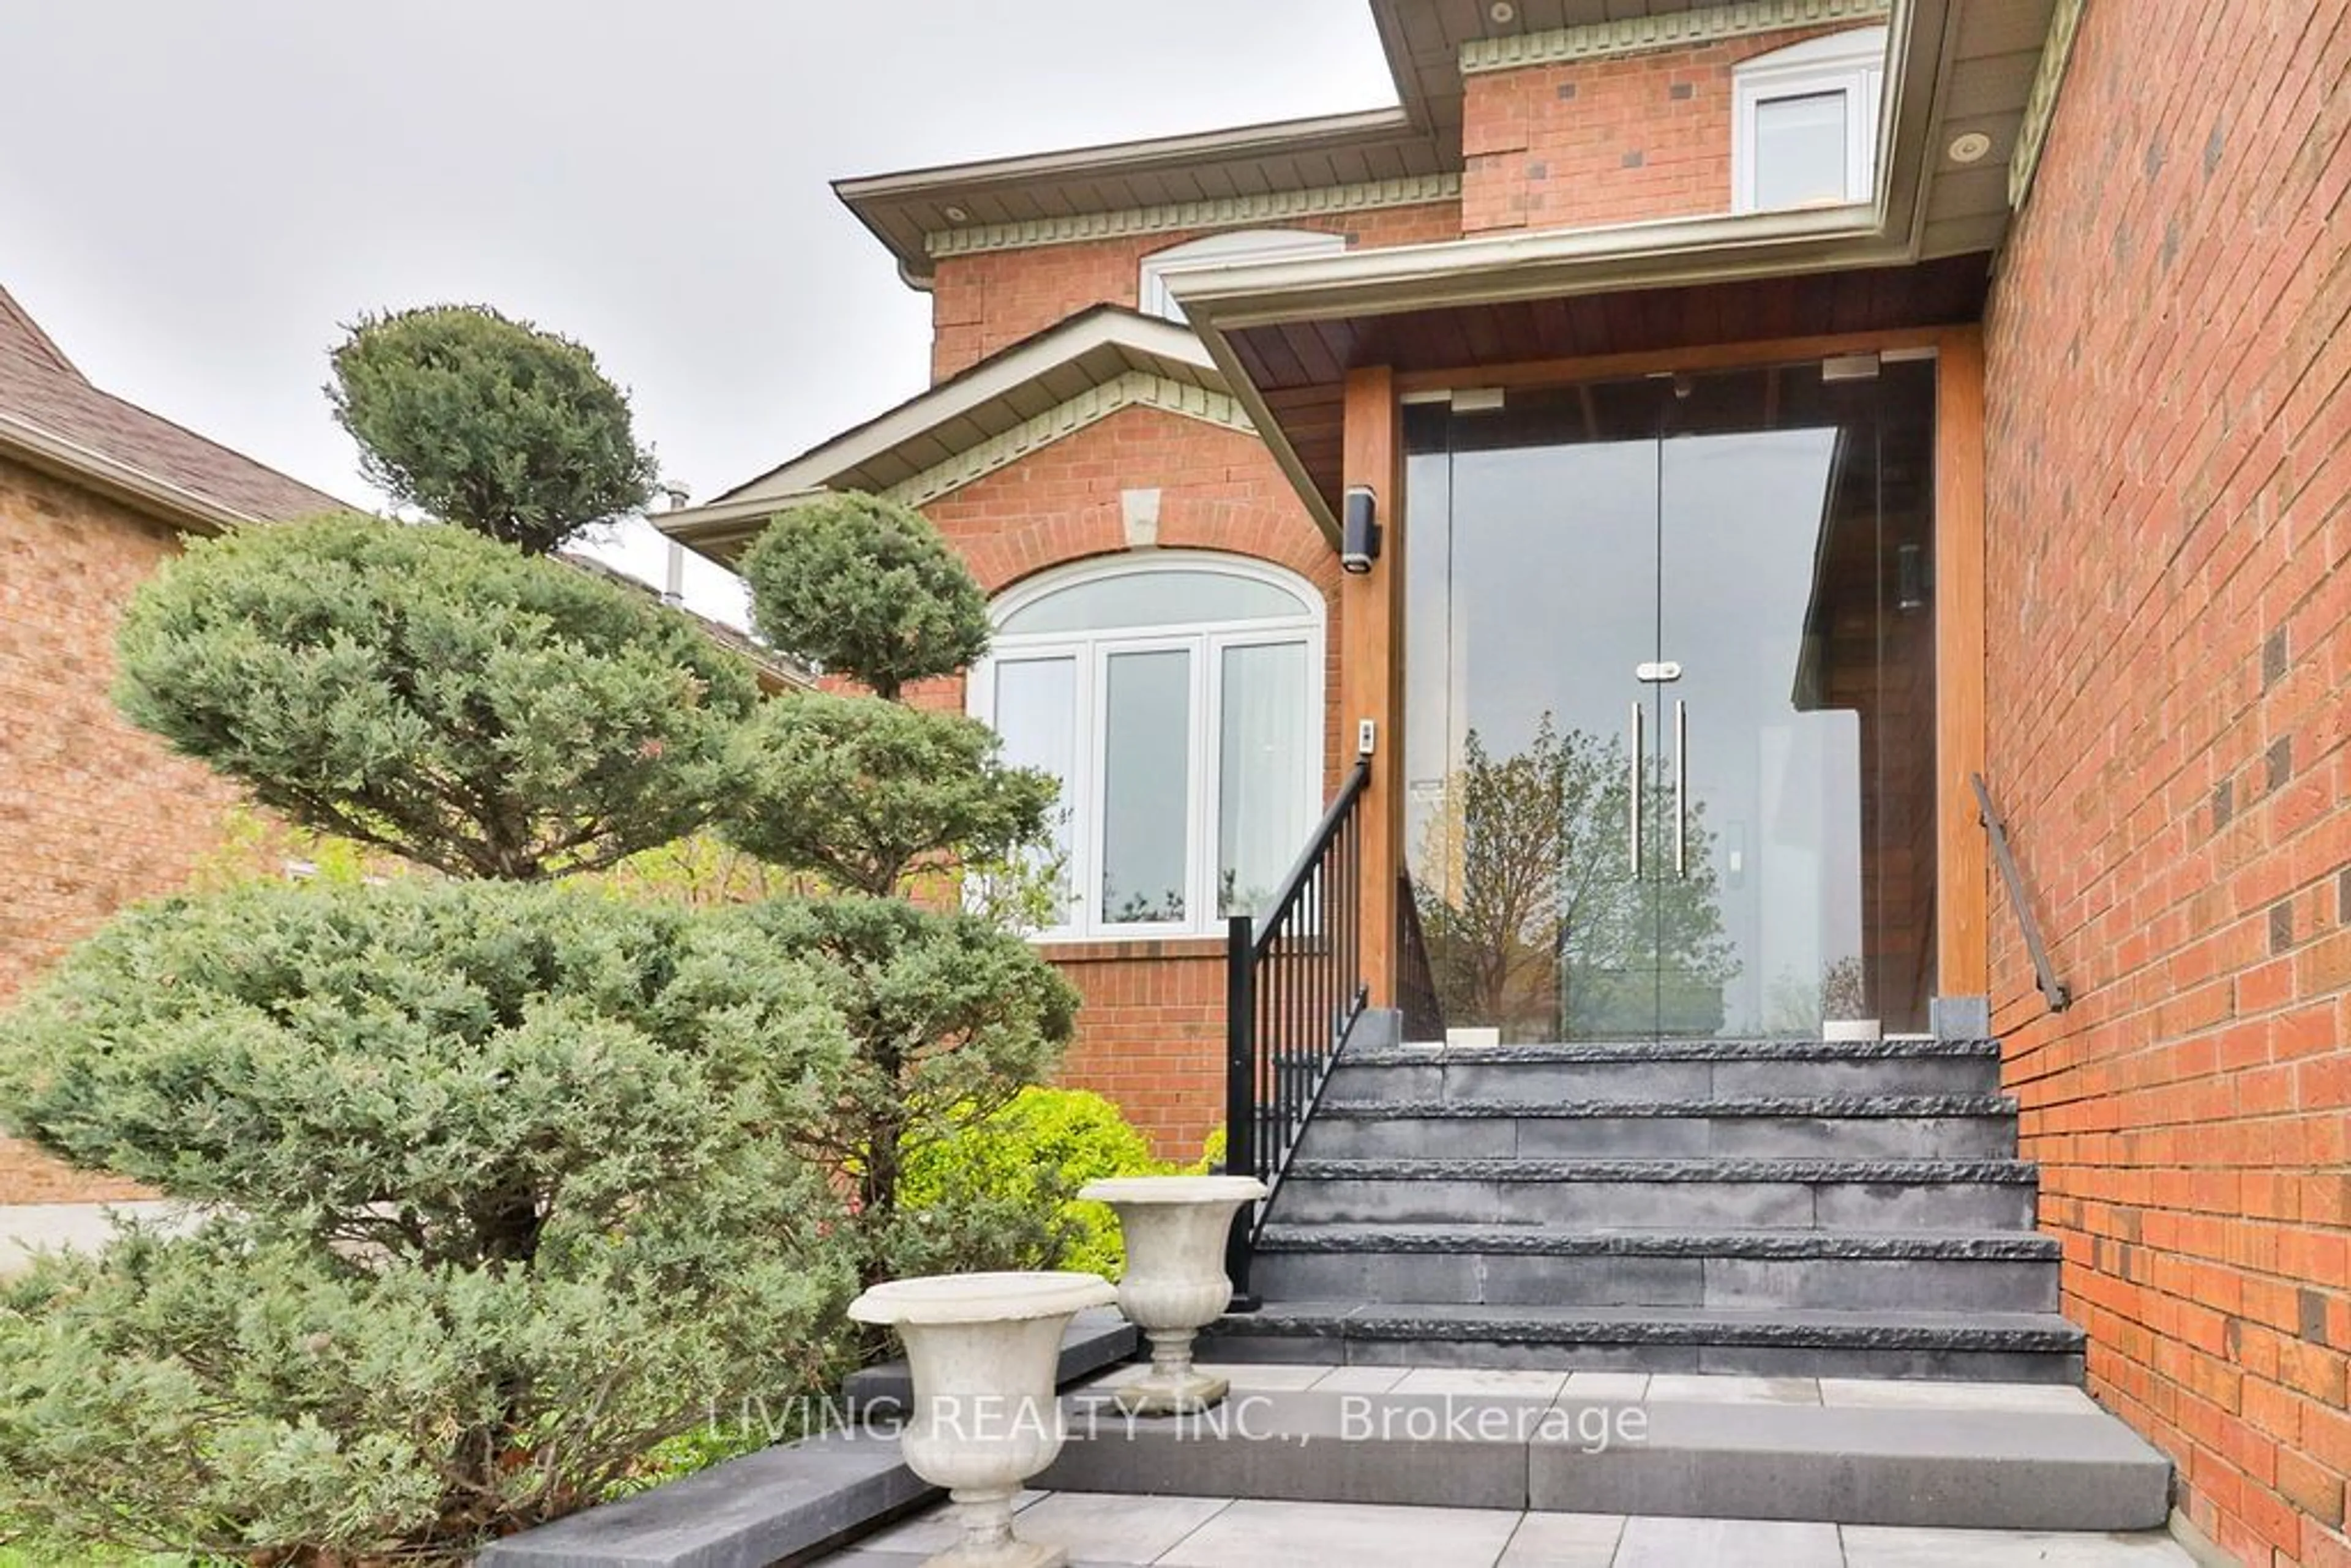 Home with brick exterior material for 219 Shaftsbury Ave, Richmond Hill Ontario L4C 0E8